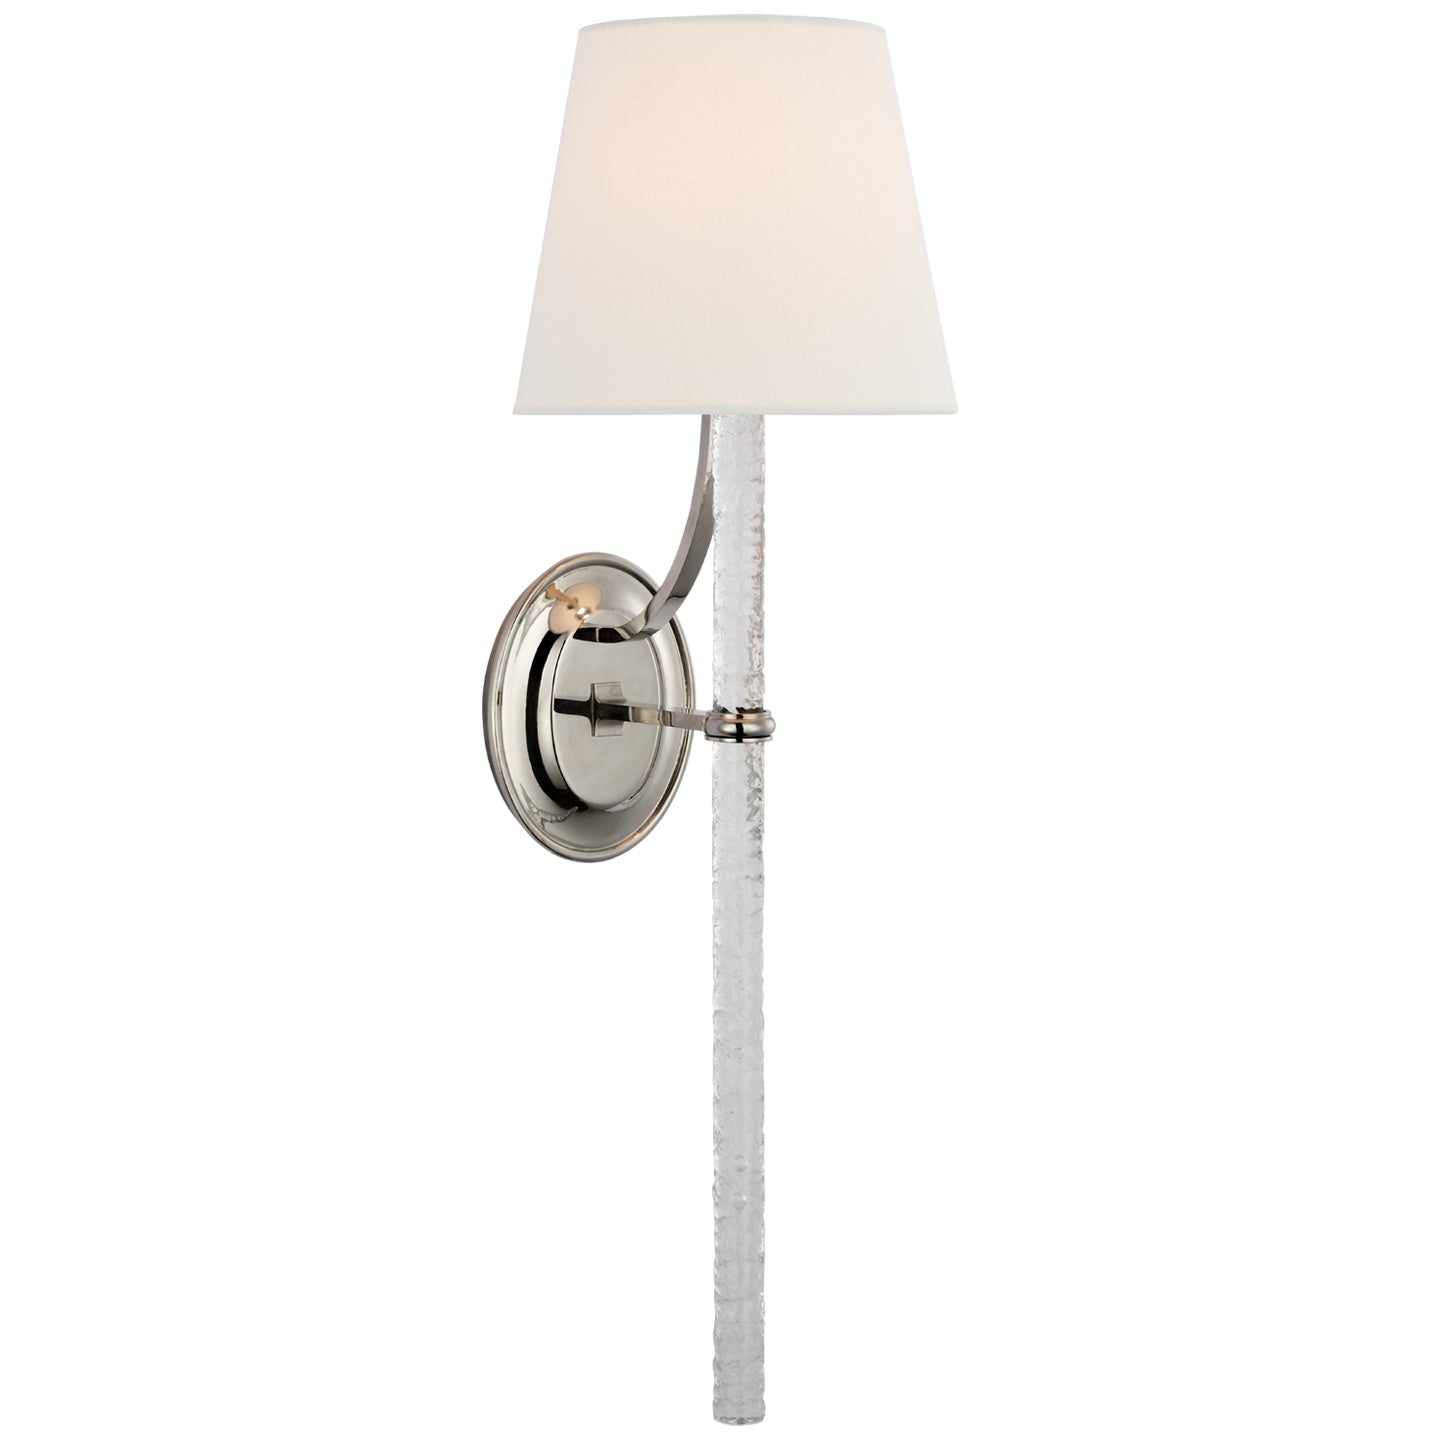 Visual Comfort Signature - MF 2326PN/CWG-L - LED Wall Sconce - Abigail - Polished Nickel and Clear Wavy Glass